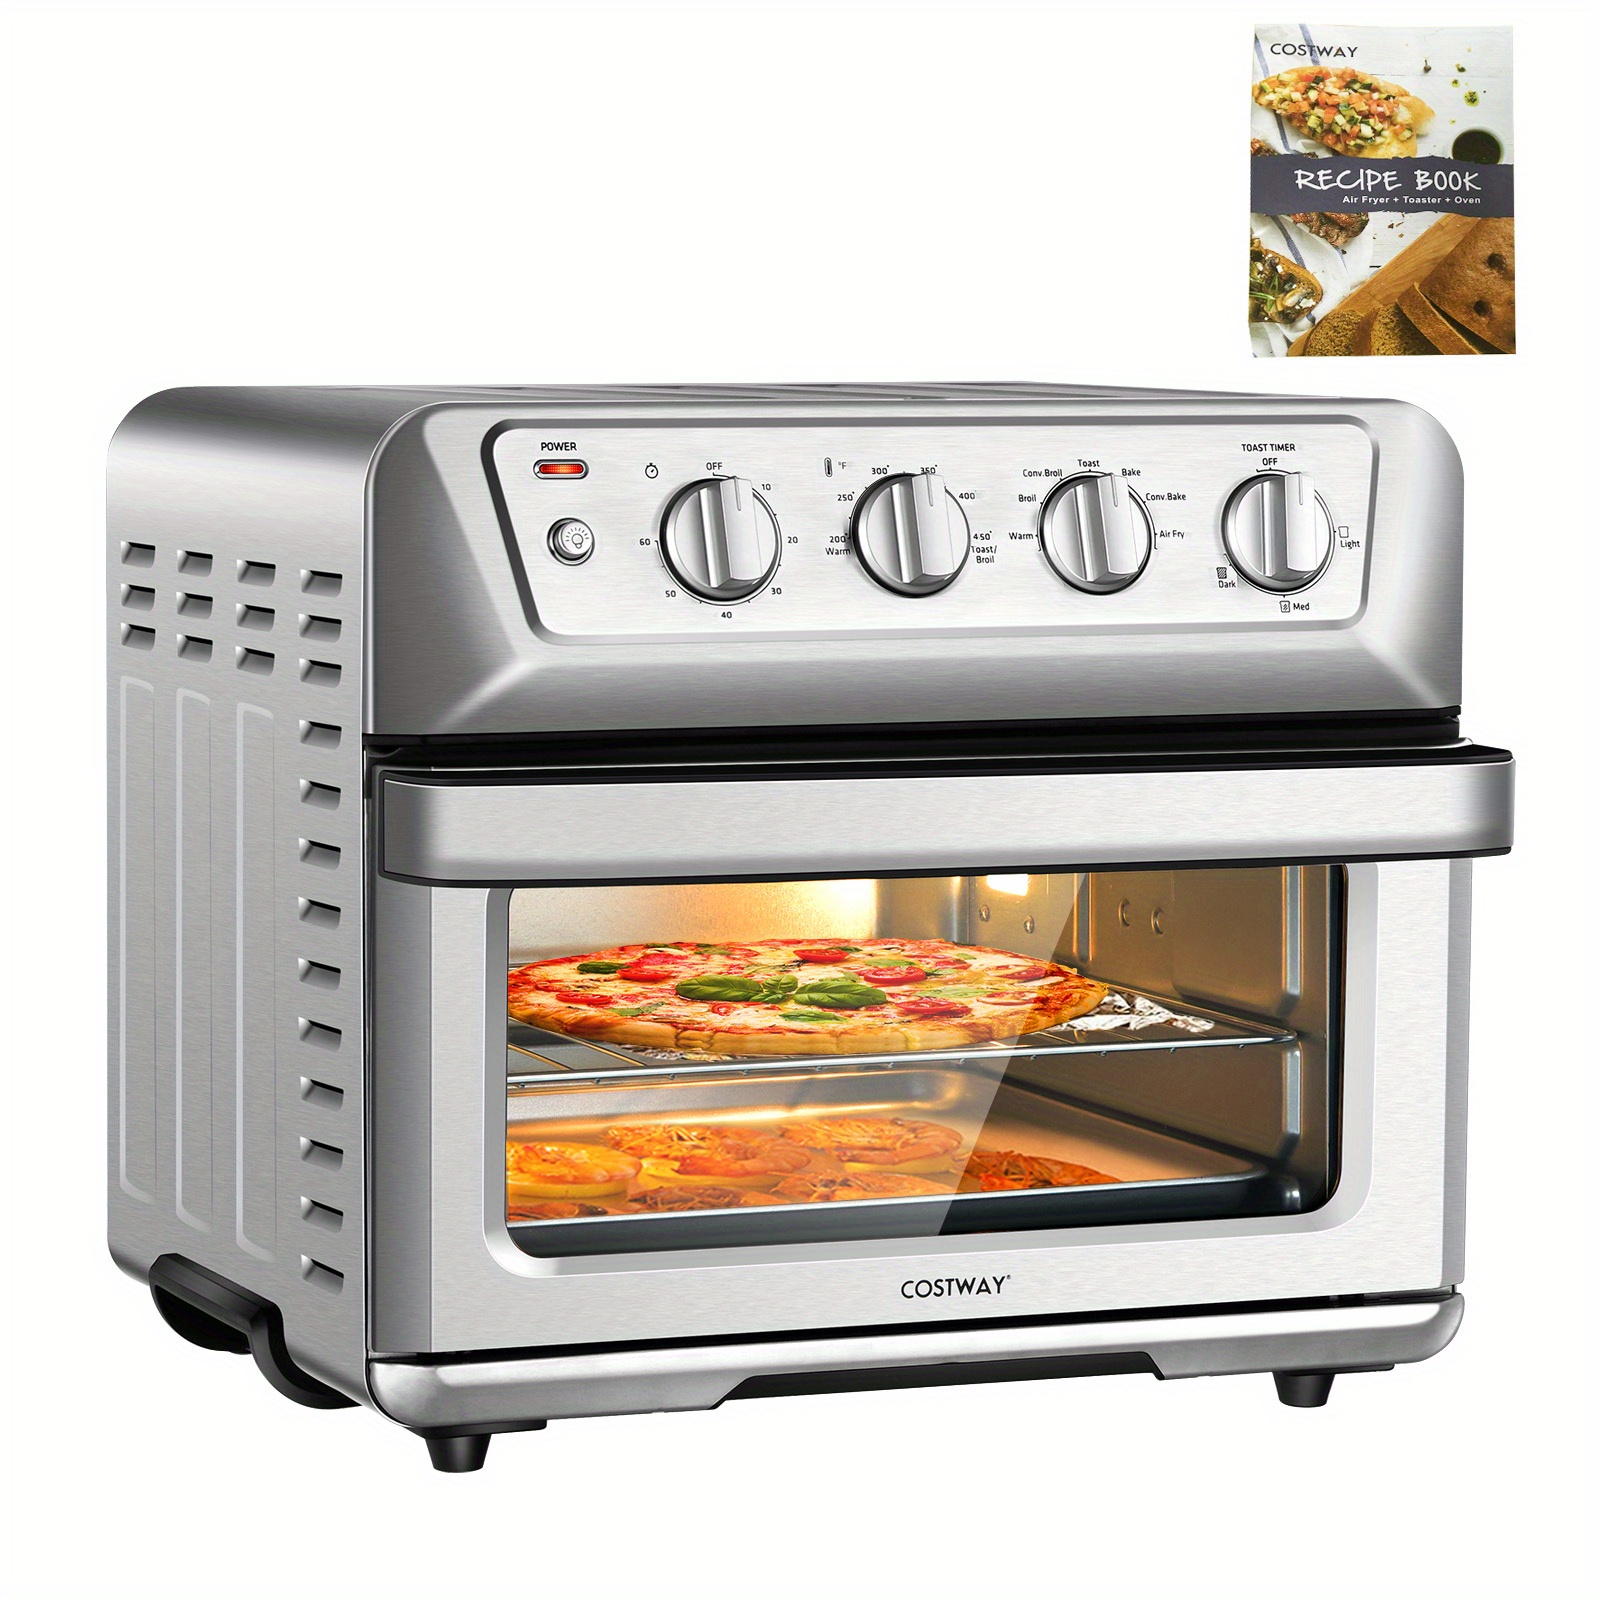 

Lifezeal 21.5qt Air Fryer Toaster Oven 1800w Countertop Convection Oven W/ Recipe